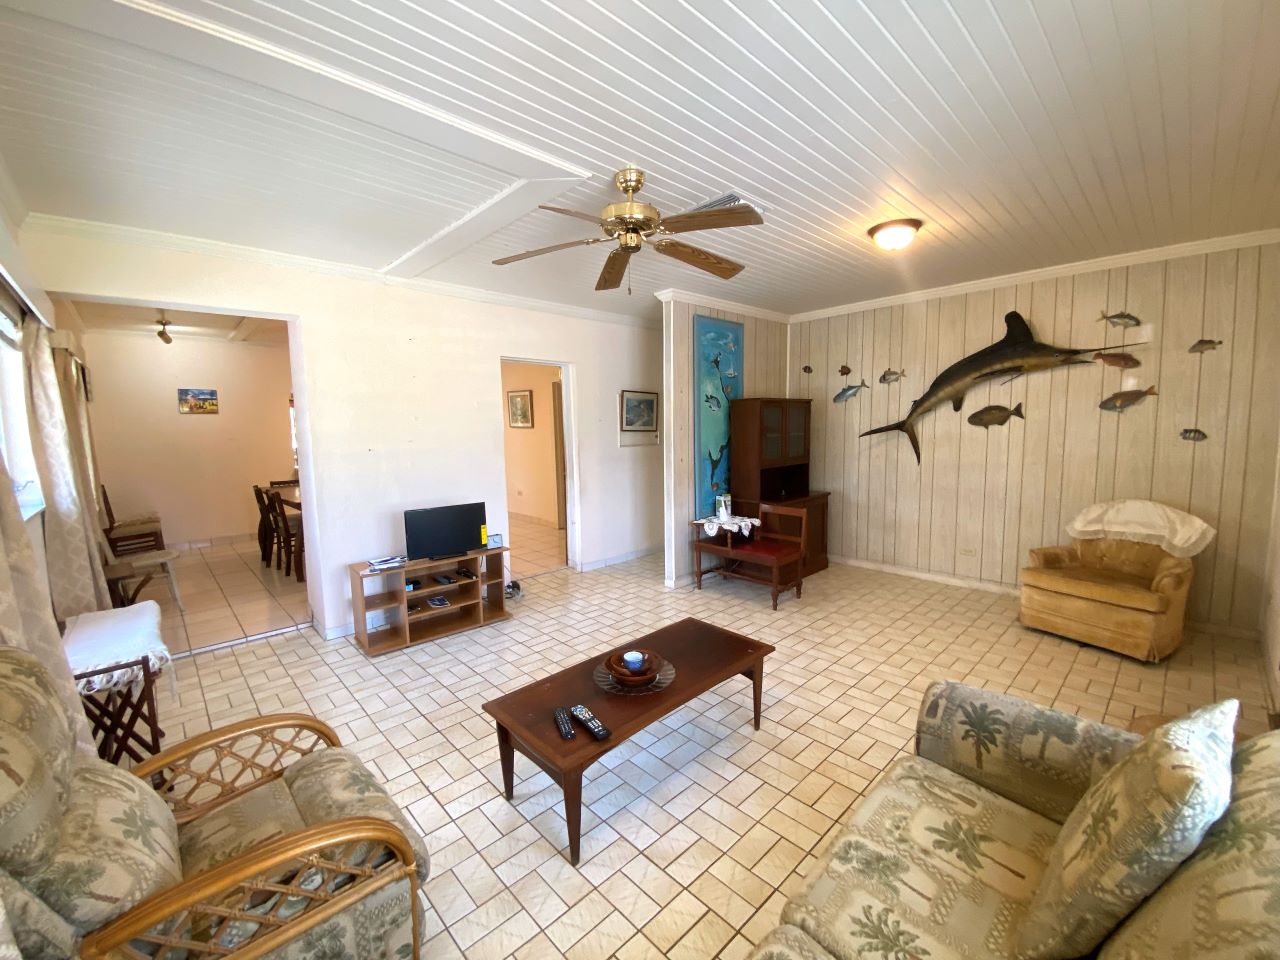 Nassau Home and Lot For Sale, Cable Beach, Nassau / New Providence, New Providence, BS, ,3 BathroomsBathrooms,Residential,For Sale,Nassau Home and Lot For Sale,1486103